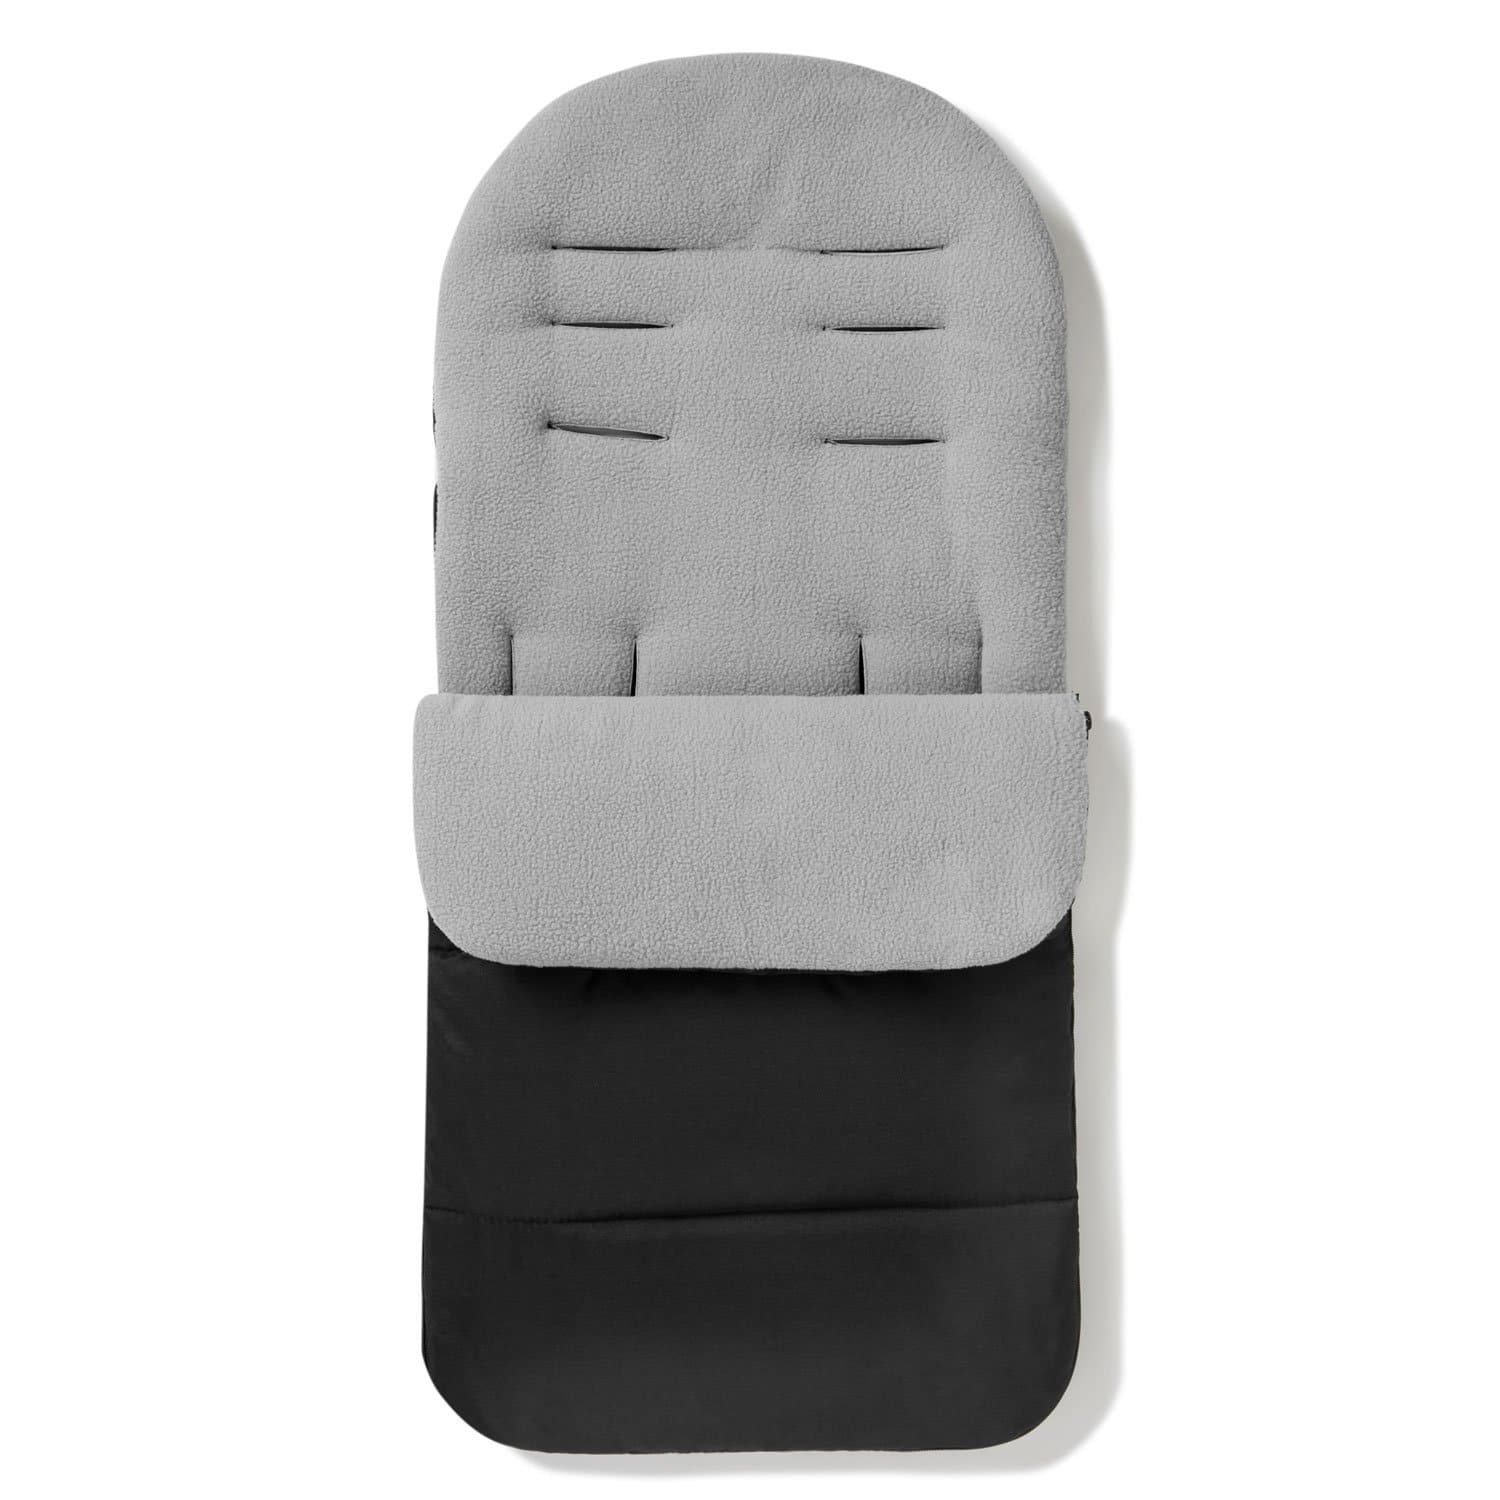 Premium Footmuff / Cosy Toes Compatible with Graco - For Your Little One